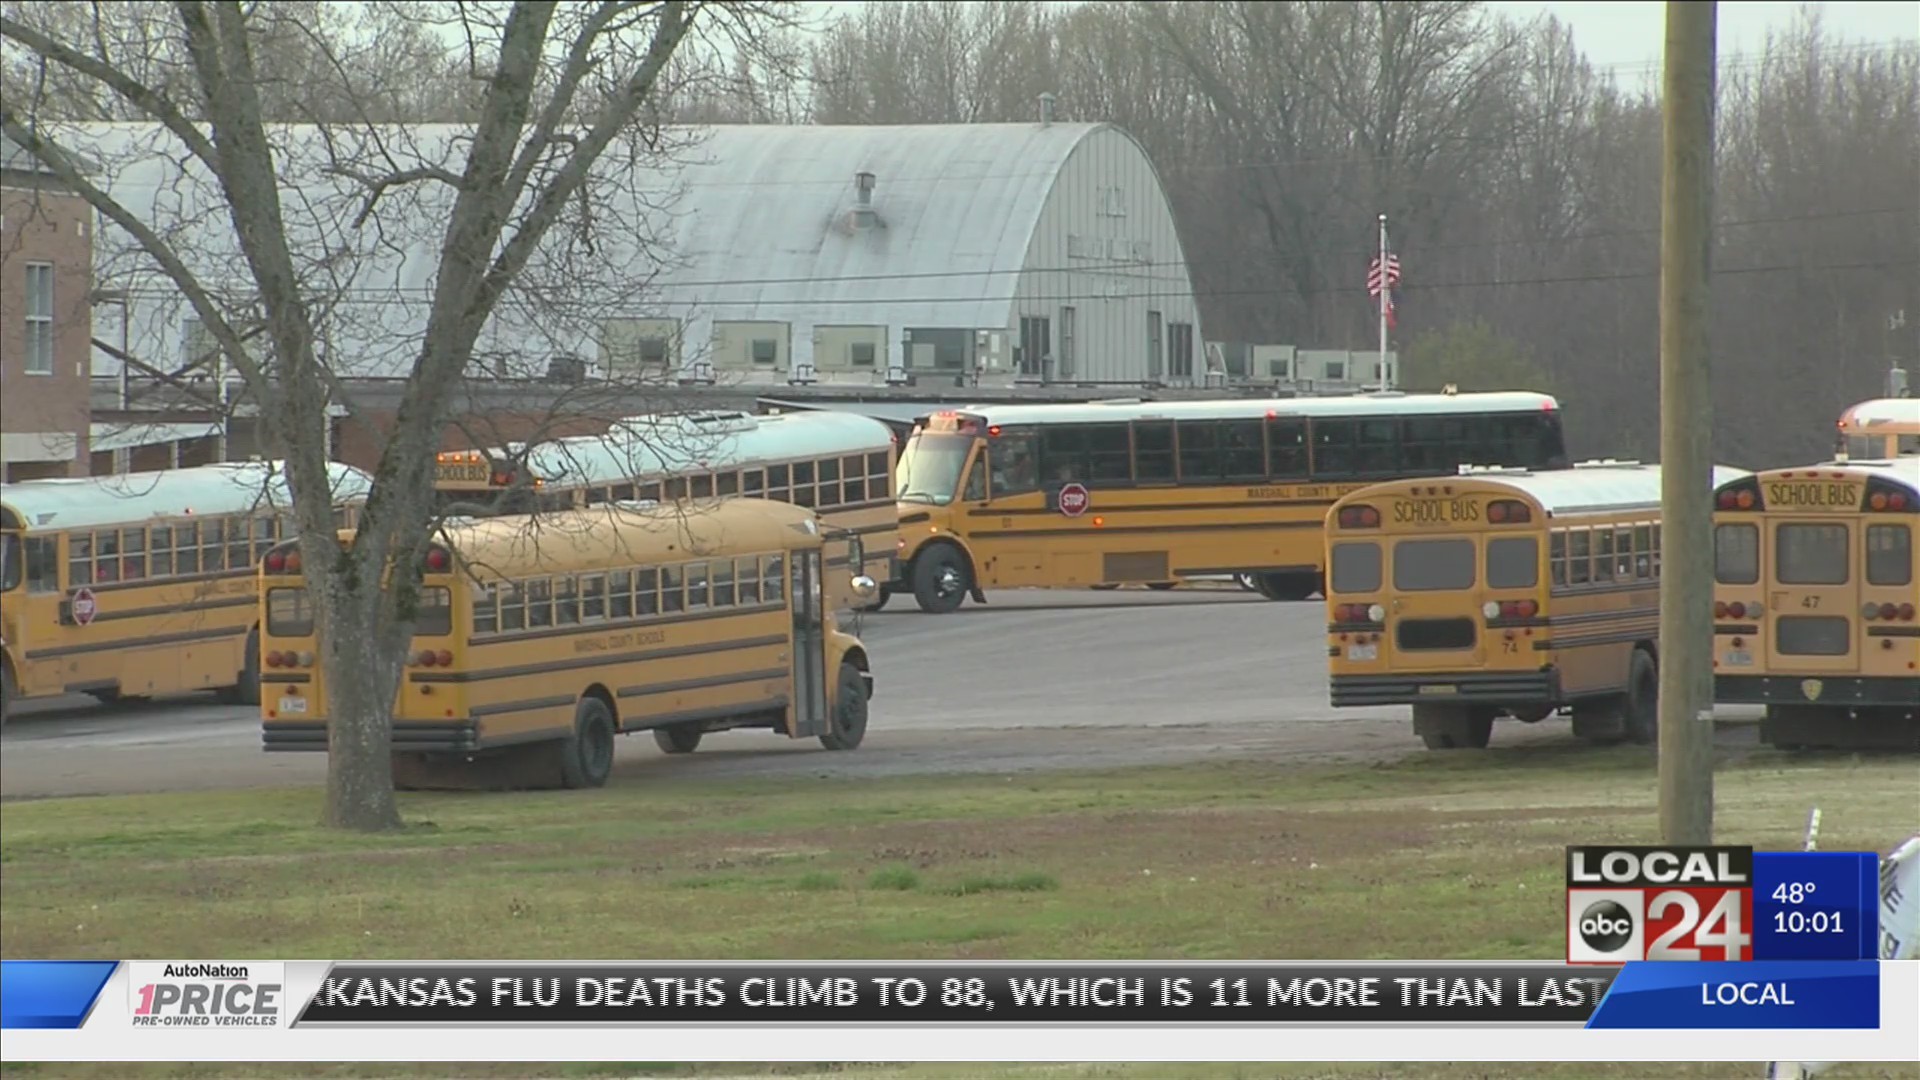 Byhalia Middle School Students Named In Shooting Threat Fear Returning Back To Class